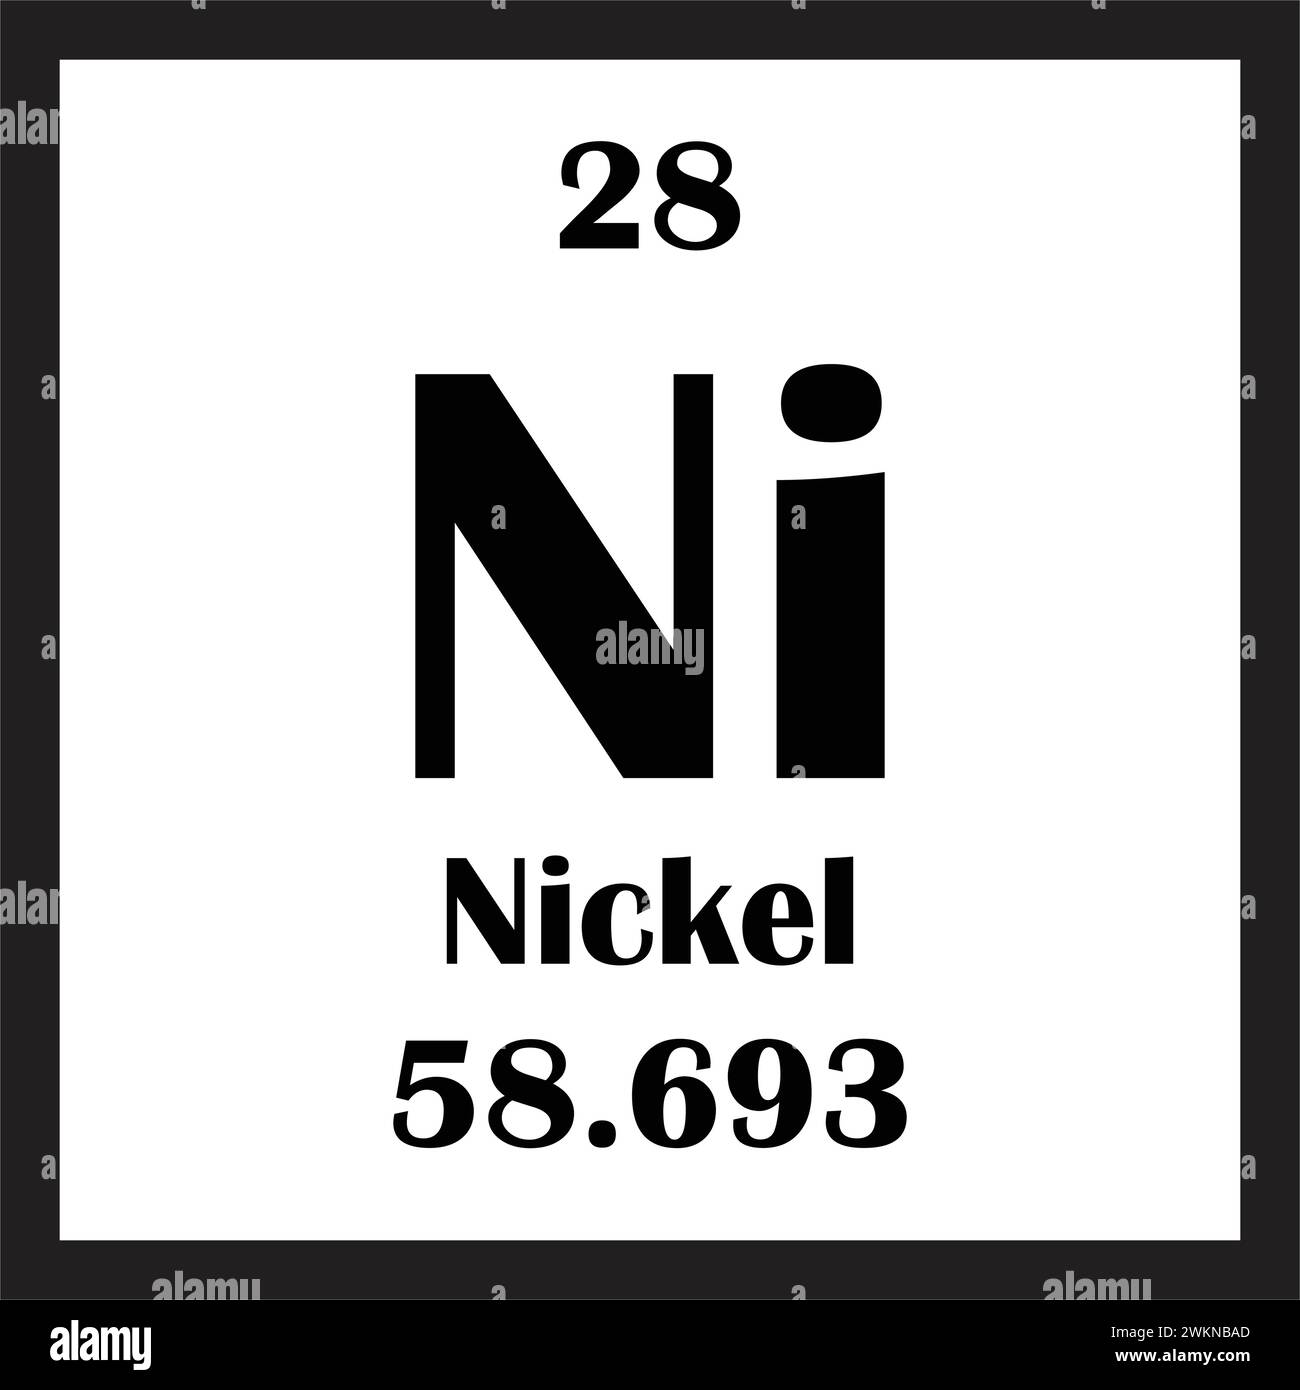 Nickel chemical element icon vector illustration design Stock Vector